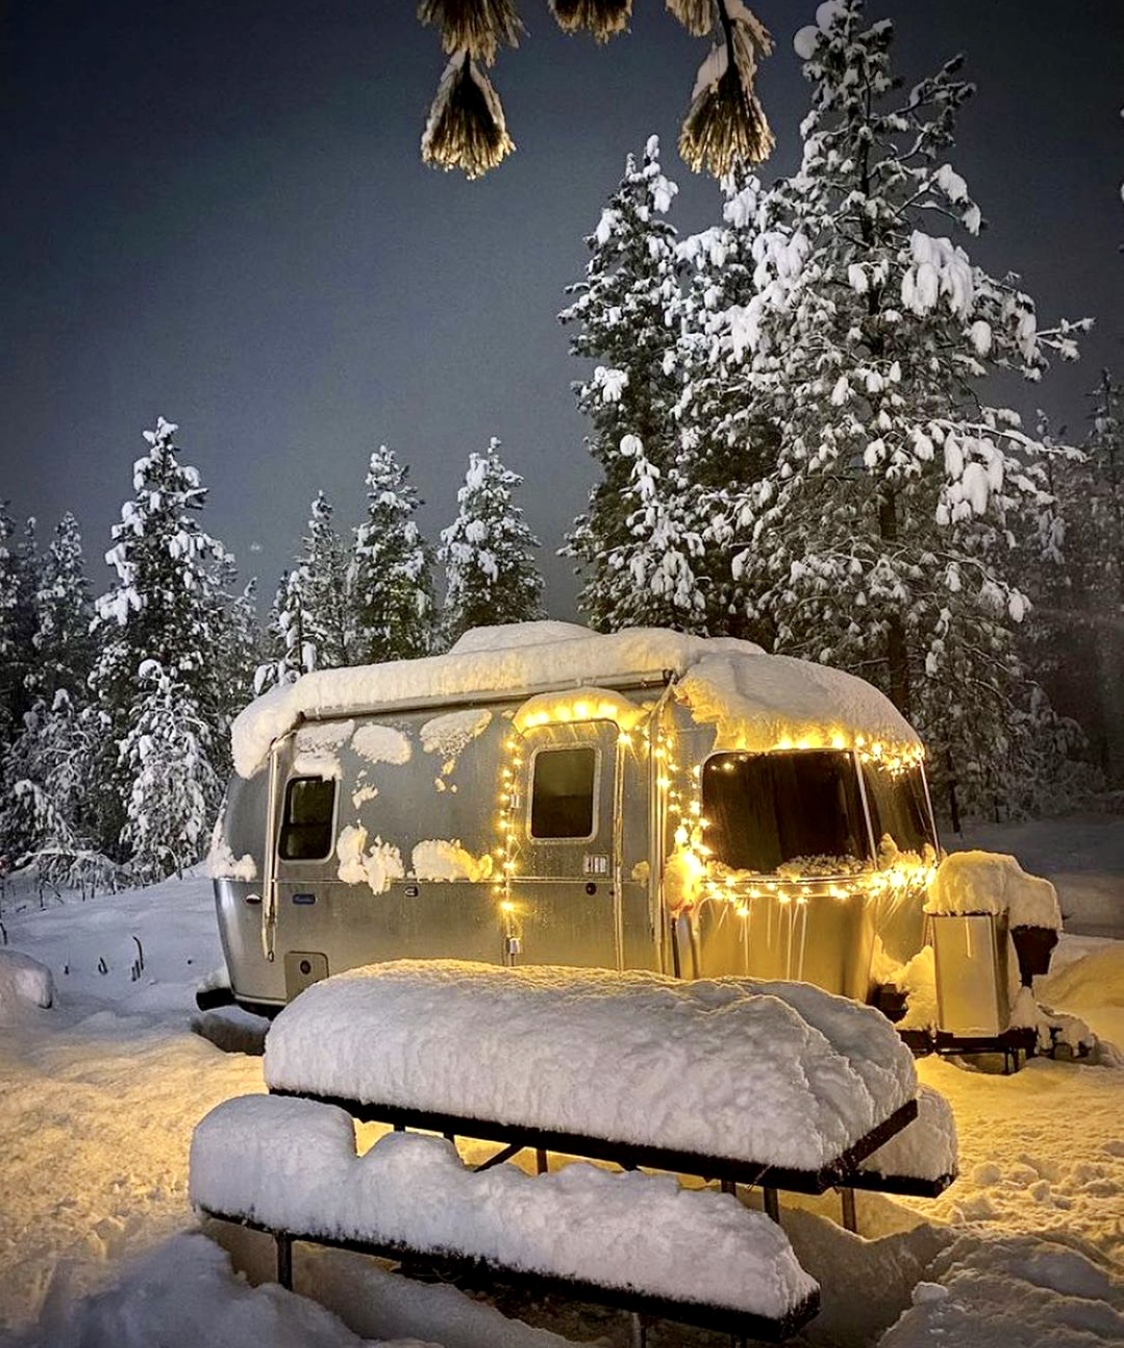 Are you staying warm during winter camping season? The SpokesmanReview